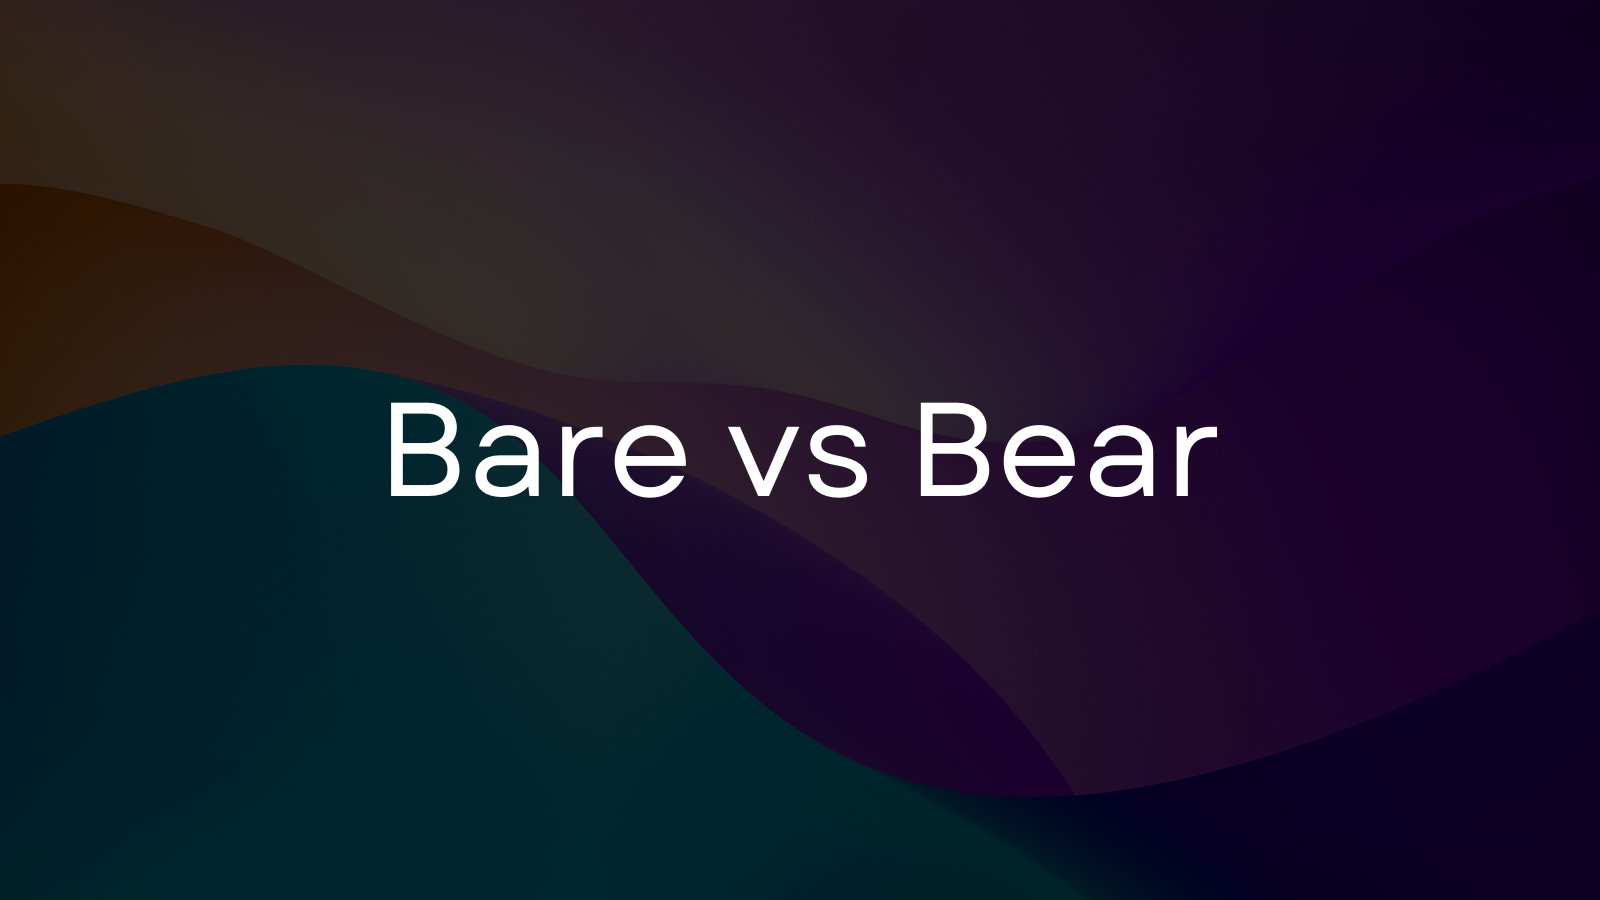 Bear vs. Bare: A simple guide to knowing the difference